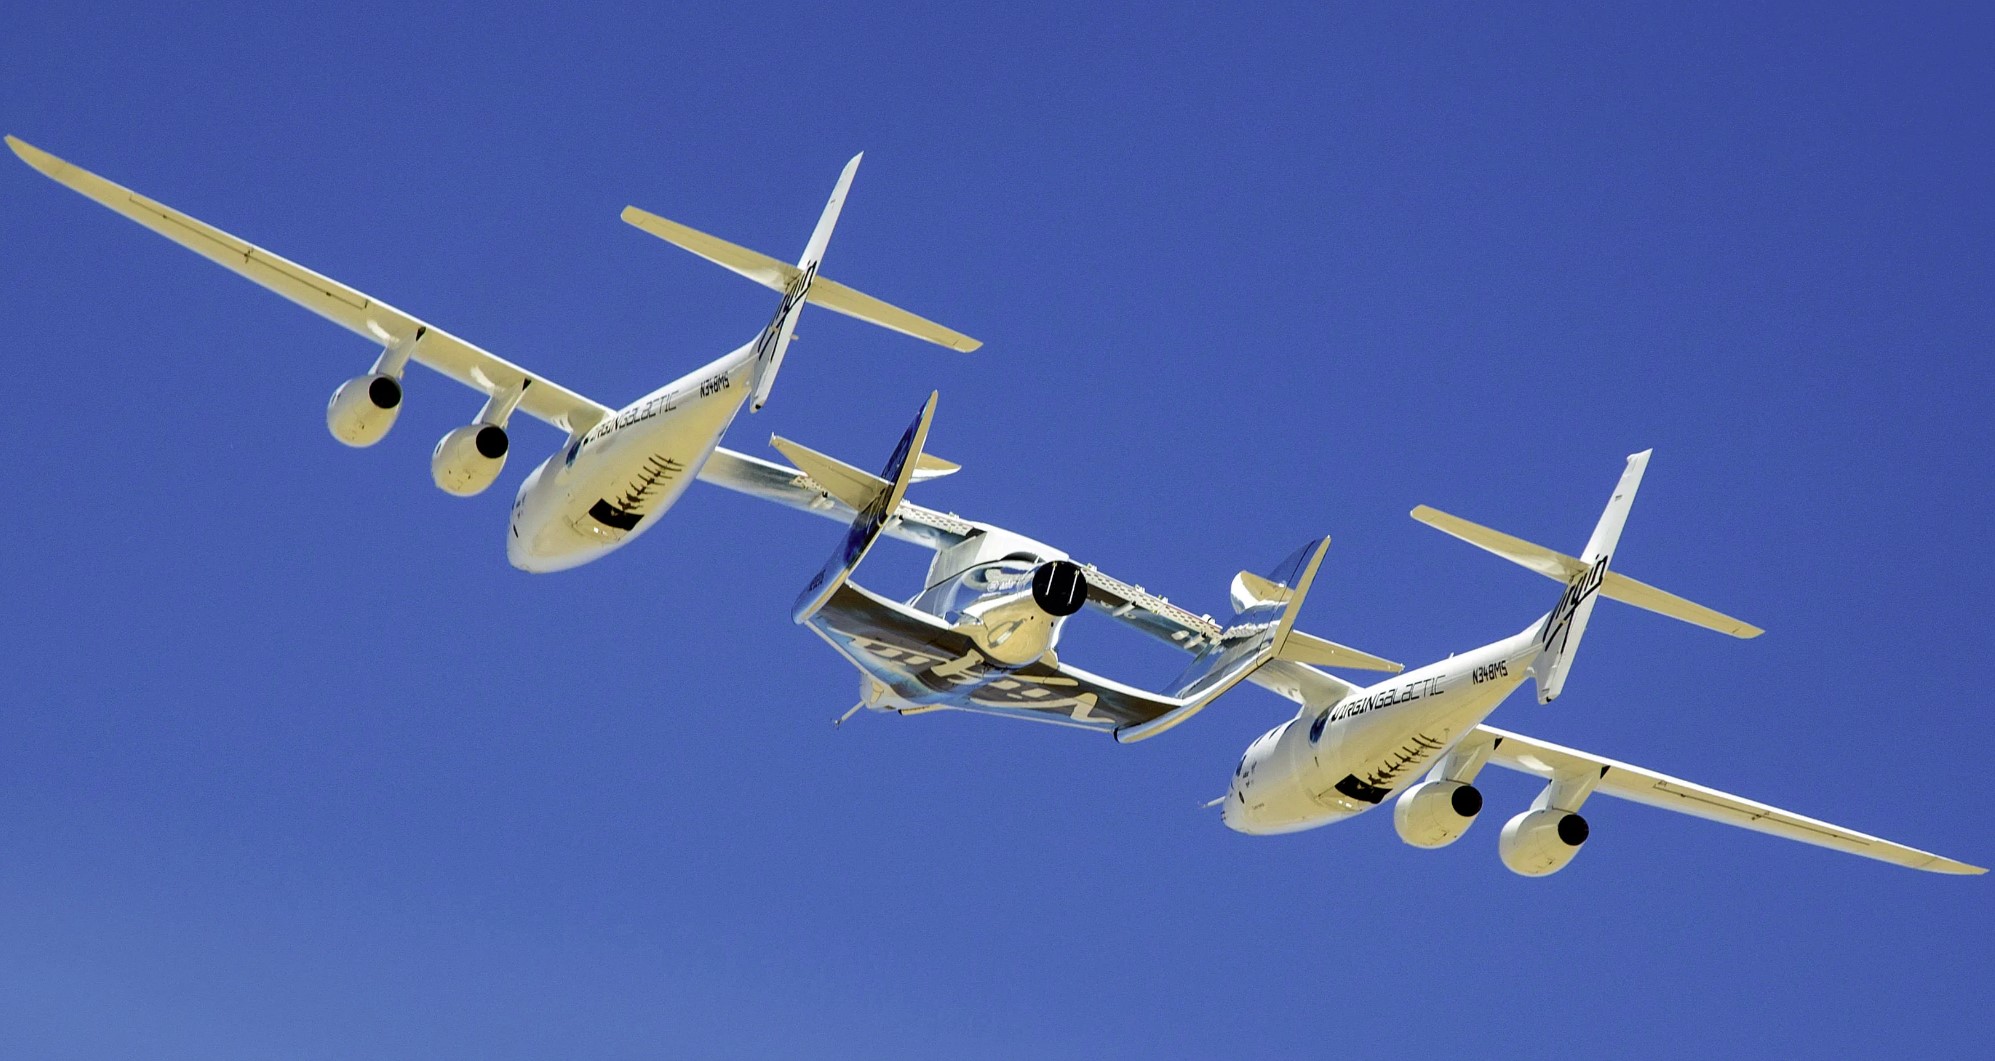 Virgin Galactic plans to make 400 flights a year and buying two new motherships